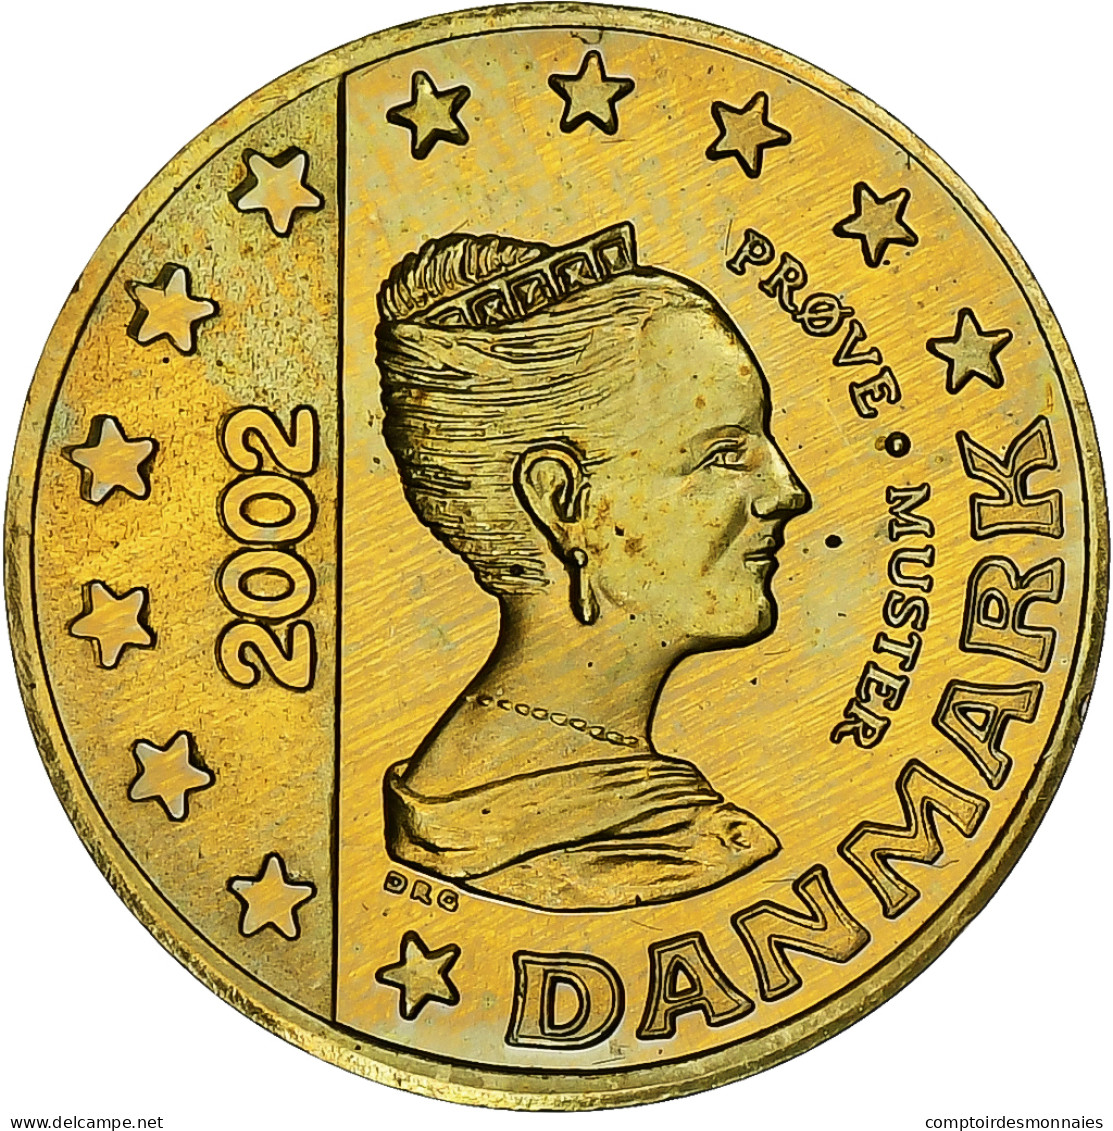 Danemark, 10 Euro Cent, Fantasy Euro Patterns, Essai-Trial, BE, 2002, Laiton - Private Proofs / Unofficial